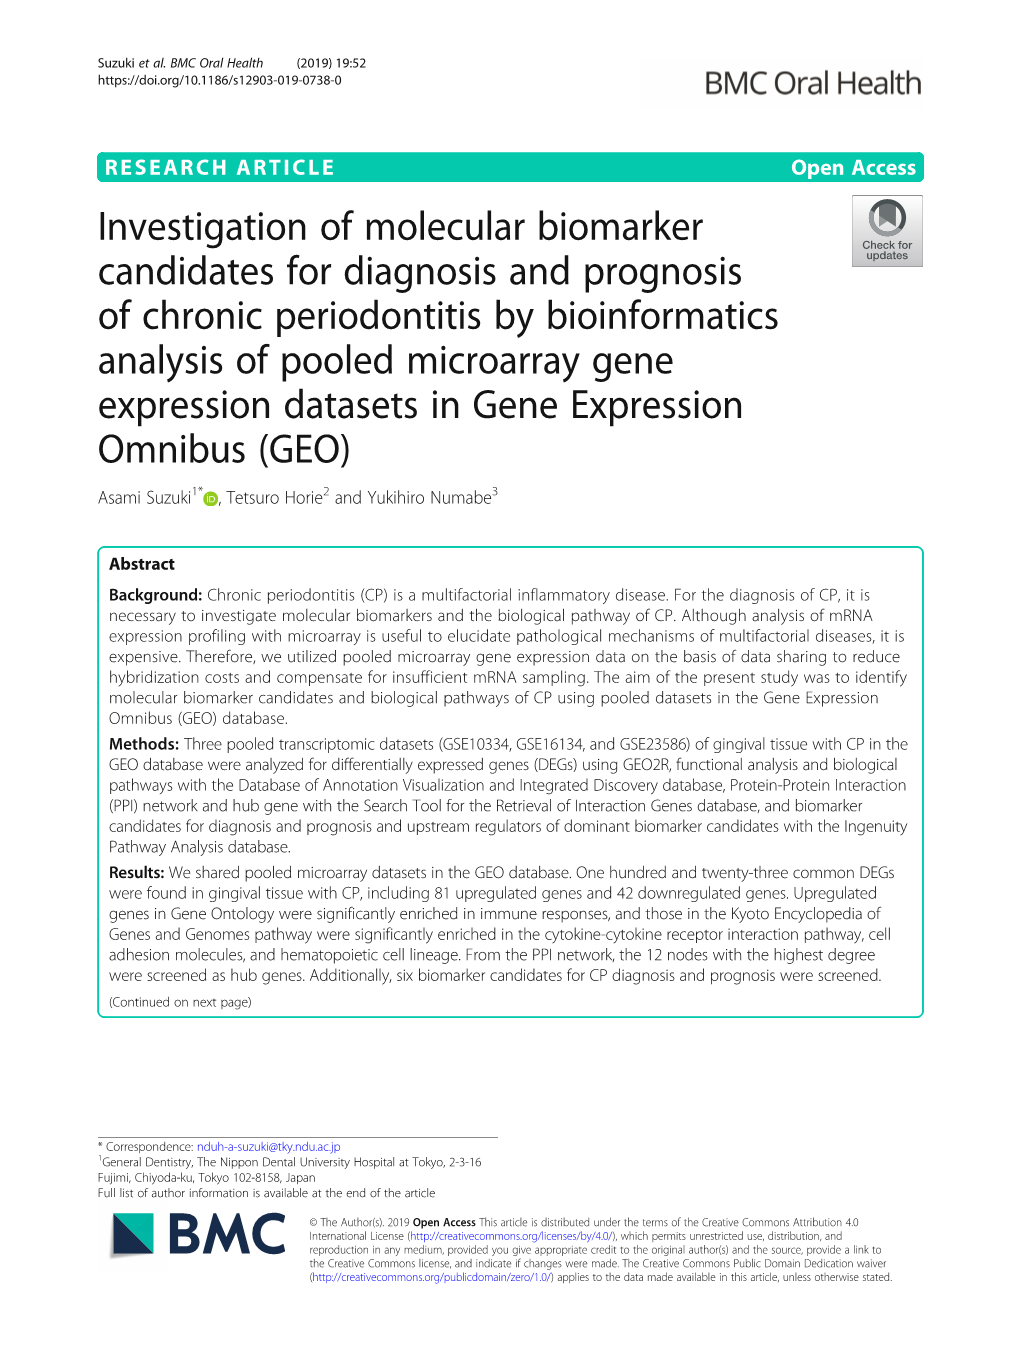 Investigation of Molecular Biomarker Candidates for Diagnosis And